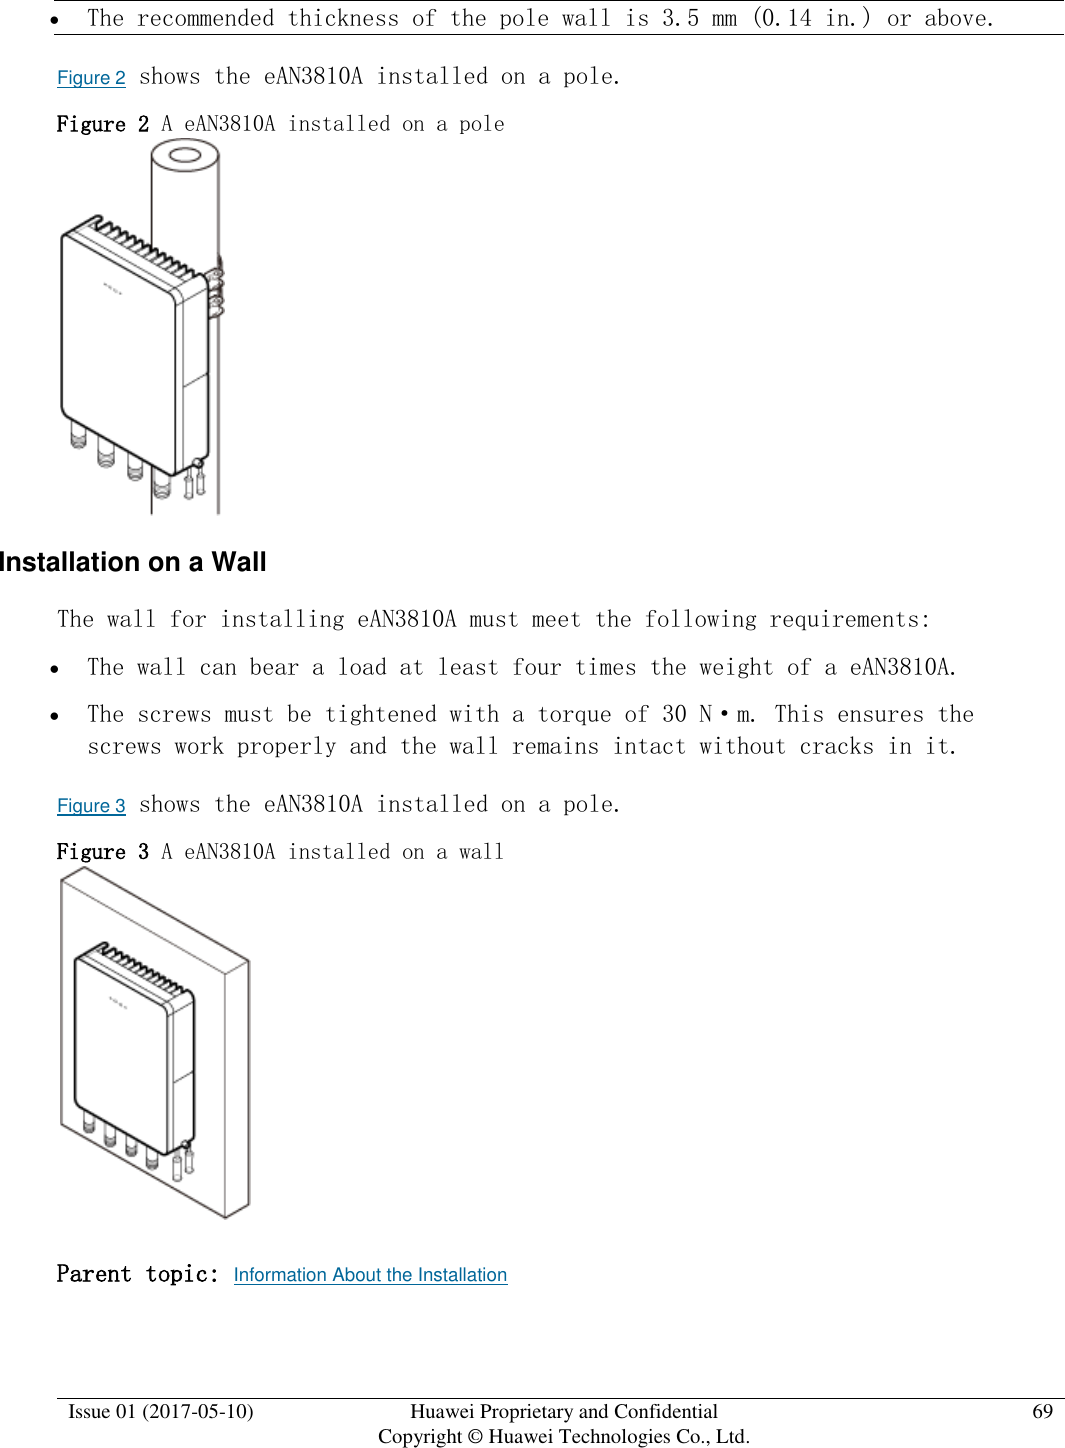  Issue 01 (2017-05-10) Huawei Proprietary and Confidential      Copyright © Huawei Technologies Co., Ltd. 69   The recommended thickness of the pole wall is 3.5 mm (0.14 in.) or above.  Figure 2 shows the eAN3810A installed on a pole. Figure 2 A eAN3810A installed on a pole   Installation on a Wall The wall for installing eAN3810A must meet the following requirements:   The wall can bear a load at least four times the weight of a eAN3810A.  The screws must be tightened with a torque of 30 N·m. This ensures the screws work properly and the wall remains intact without cracks in it.  Figure 3 shows the eAN3810A installed on a pole. Figure 3 A eAN3810A installed on a wall   Parent topic: Information About the Installation 